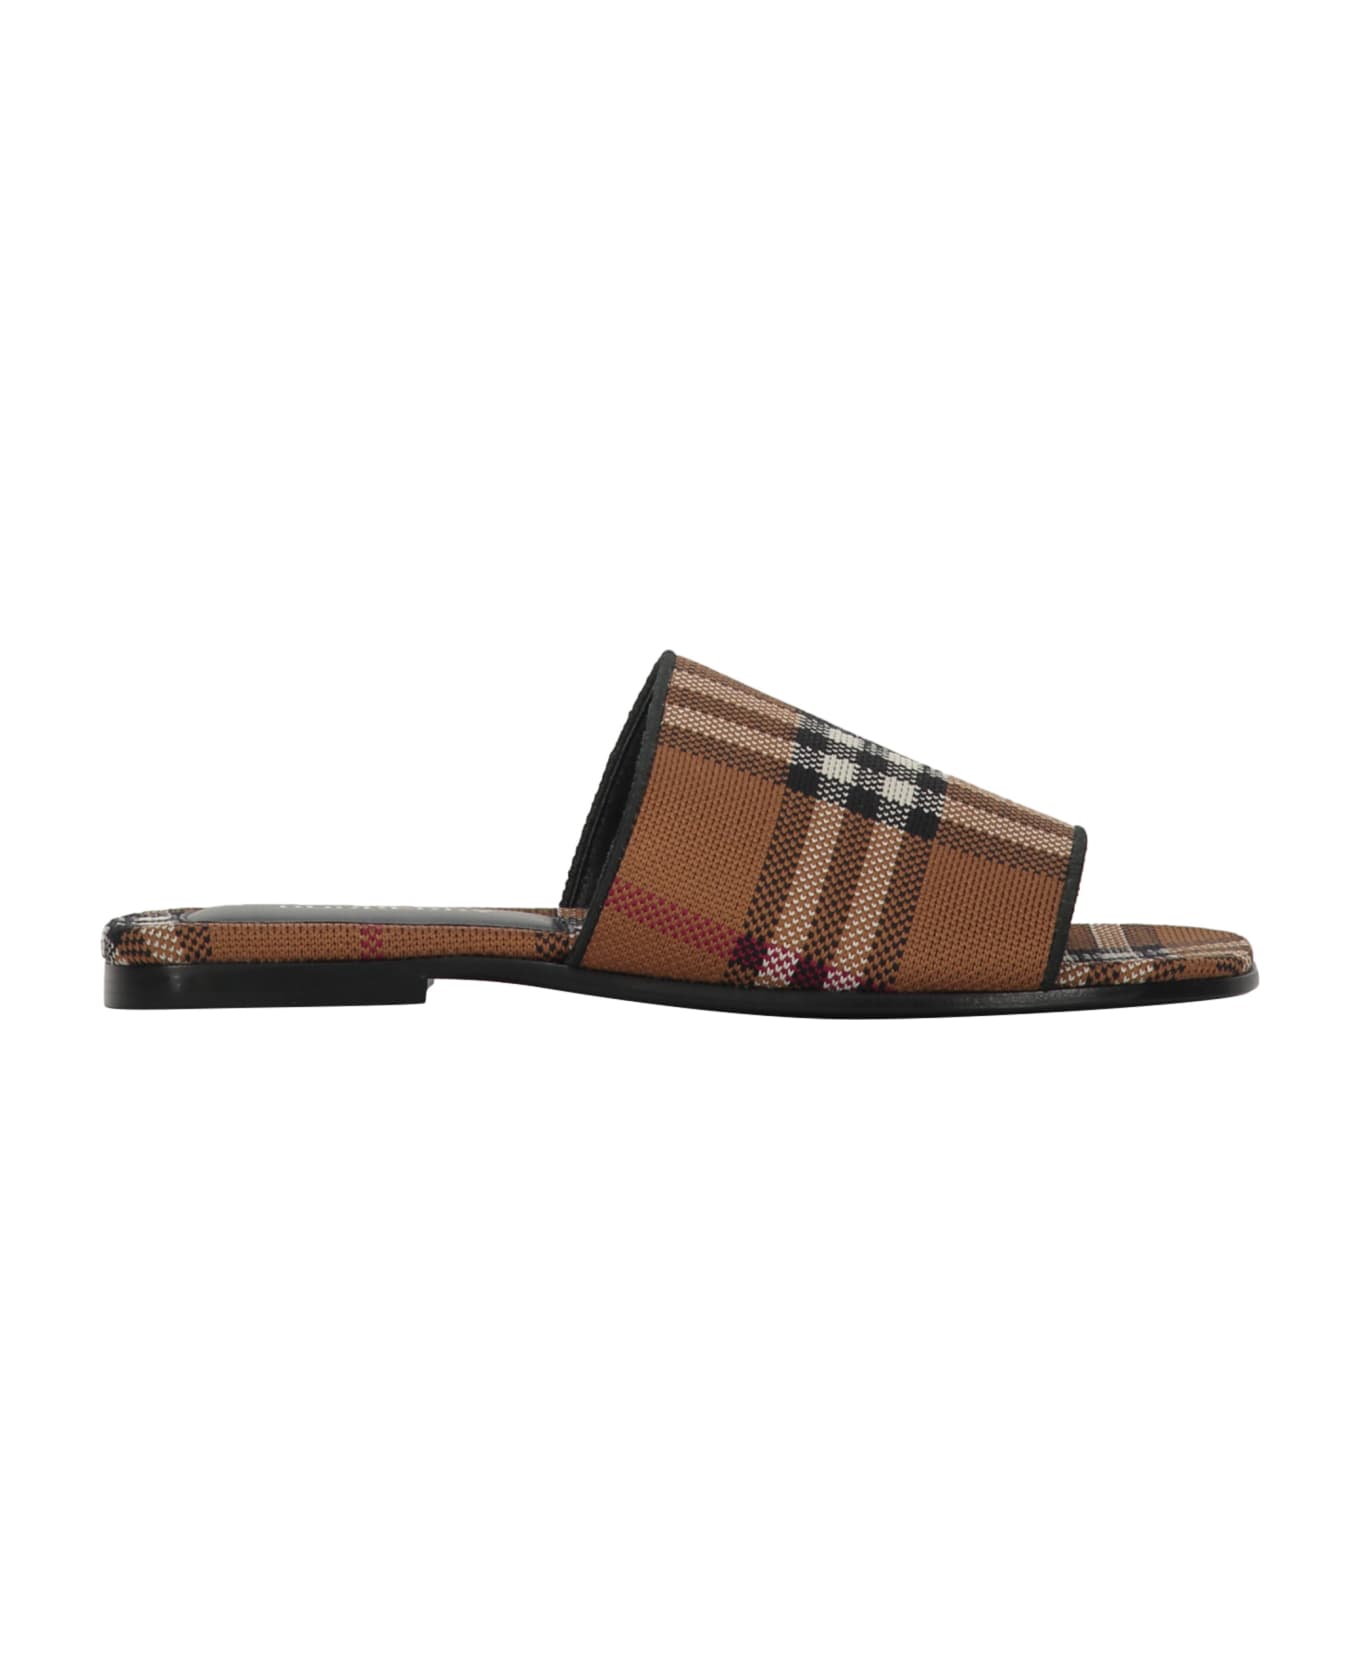 Burberry Leather And Fabric Slides - Beige サンダル